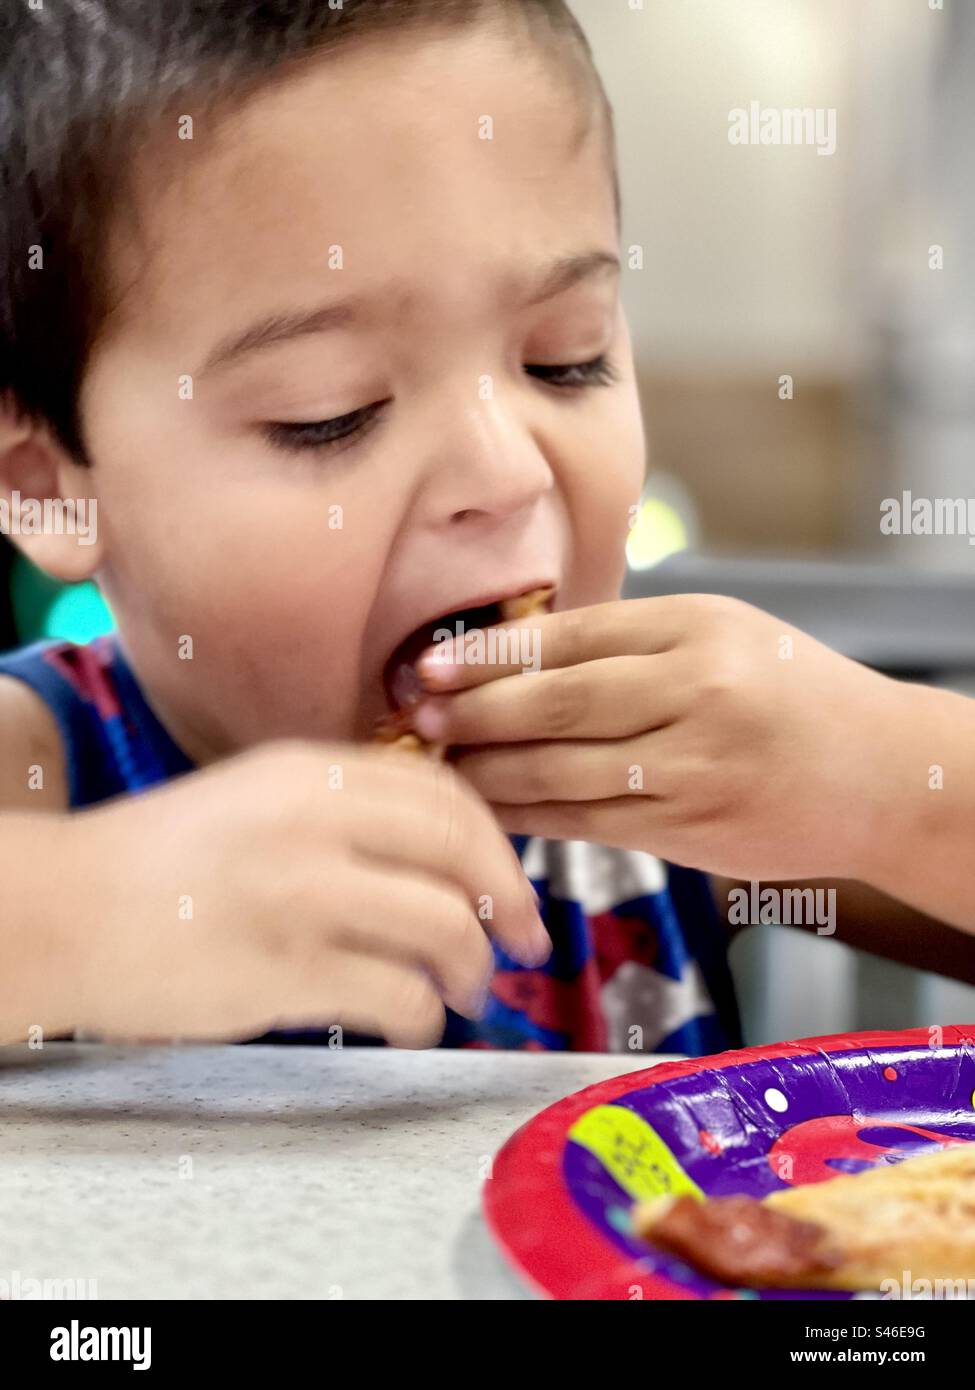 Young boy with dark hair eating in a restaurant using his hands Stock Photo